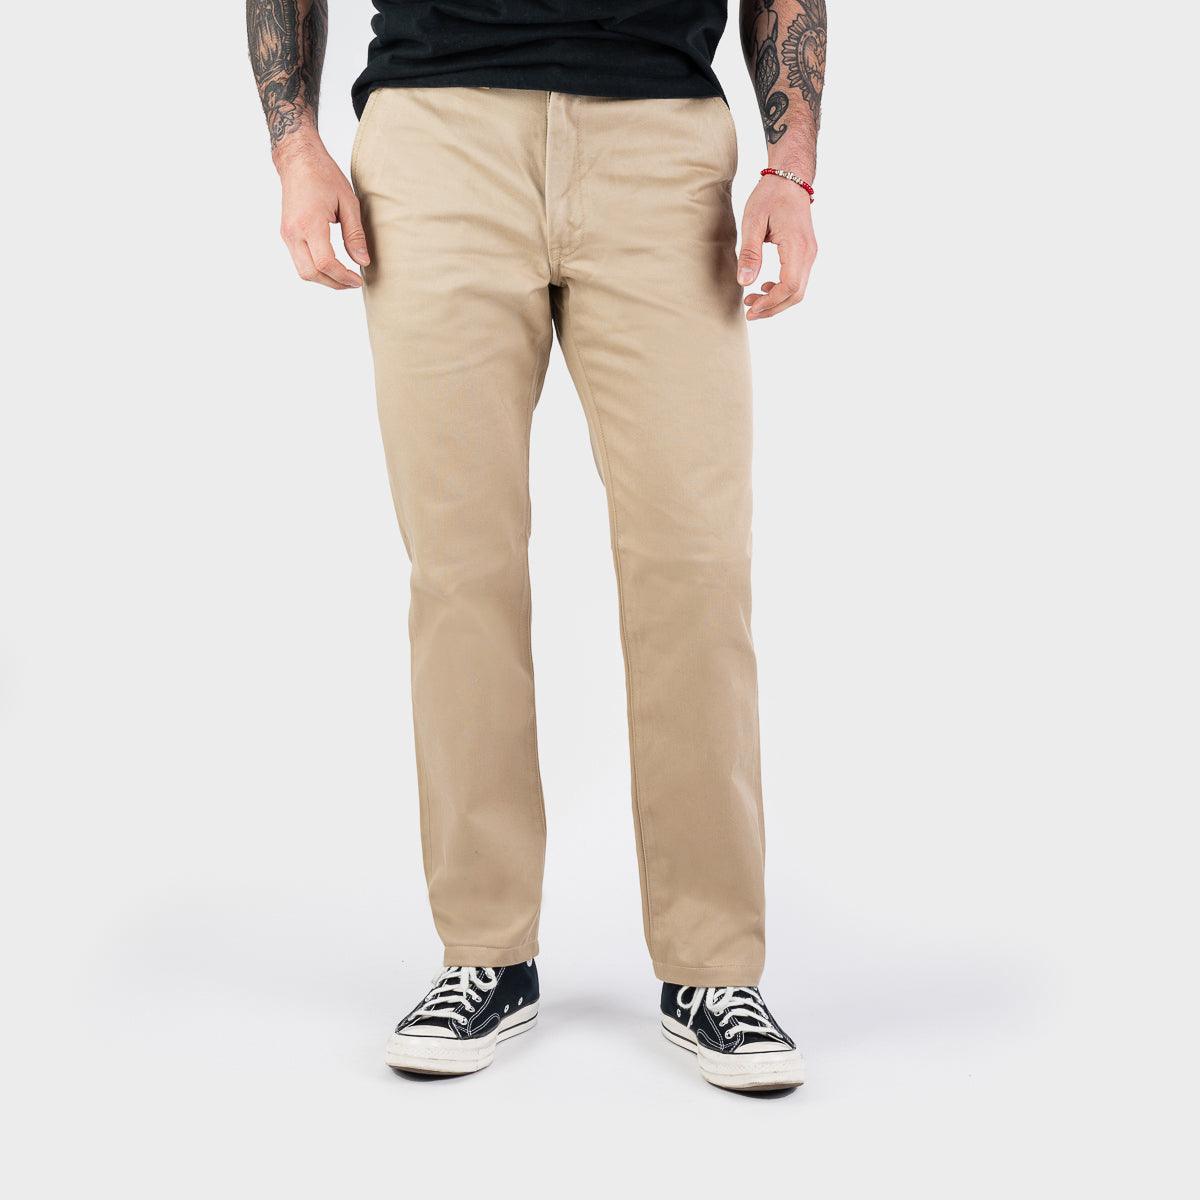 Image showing the IH-731-KHA - 12oz Heavy Cotton Relaxed Fit Chinos - Khaki which is a Trousers described by the following info Bottoms, Iron Heart, Released, Trousers and sold on the IRON HEART GERMANY online store